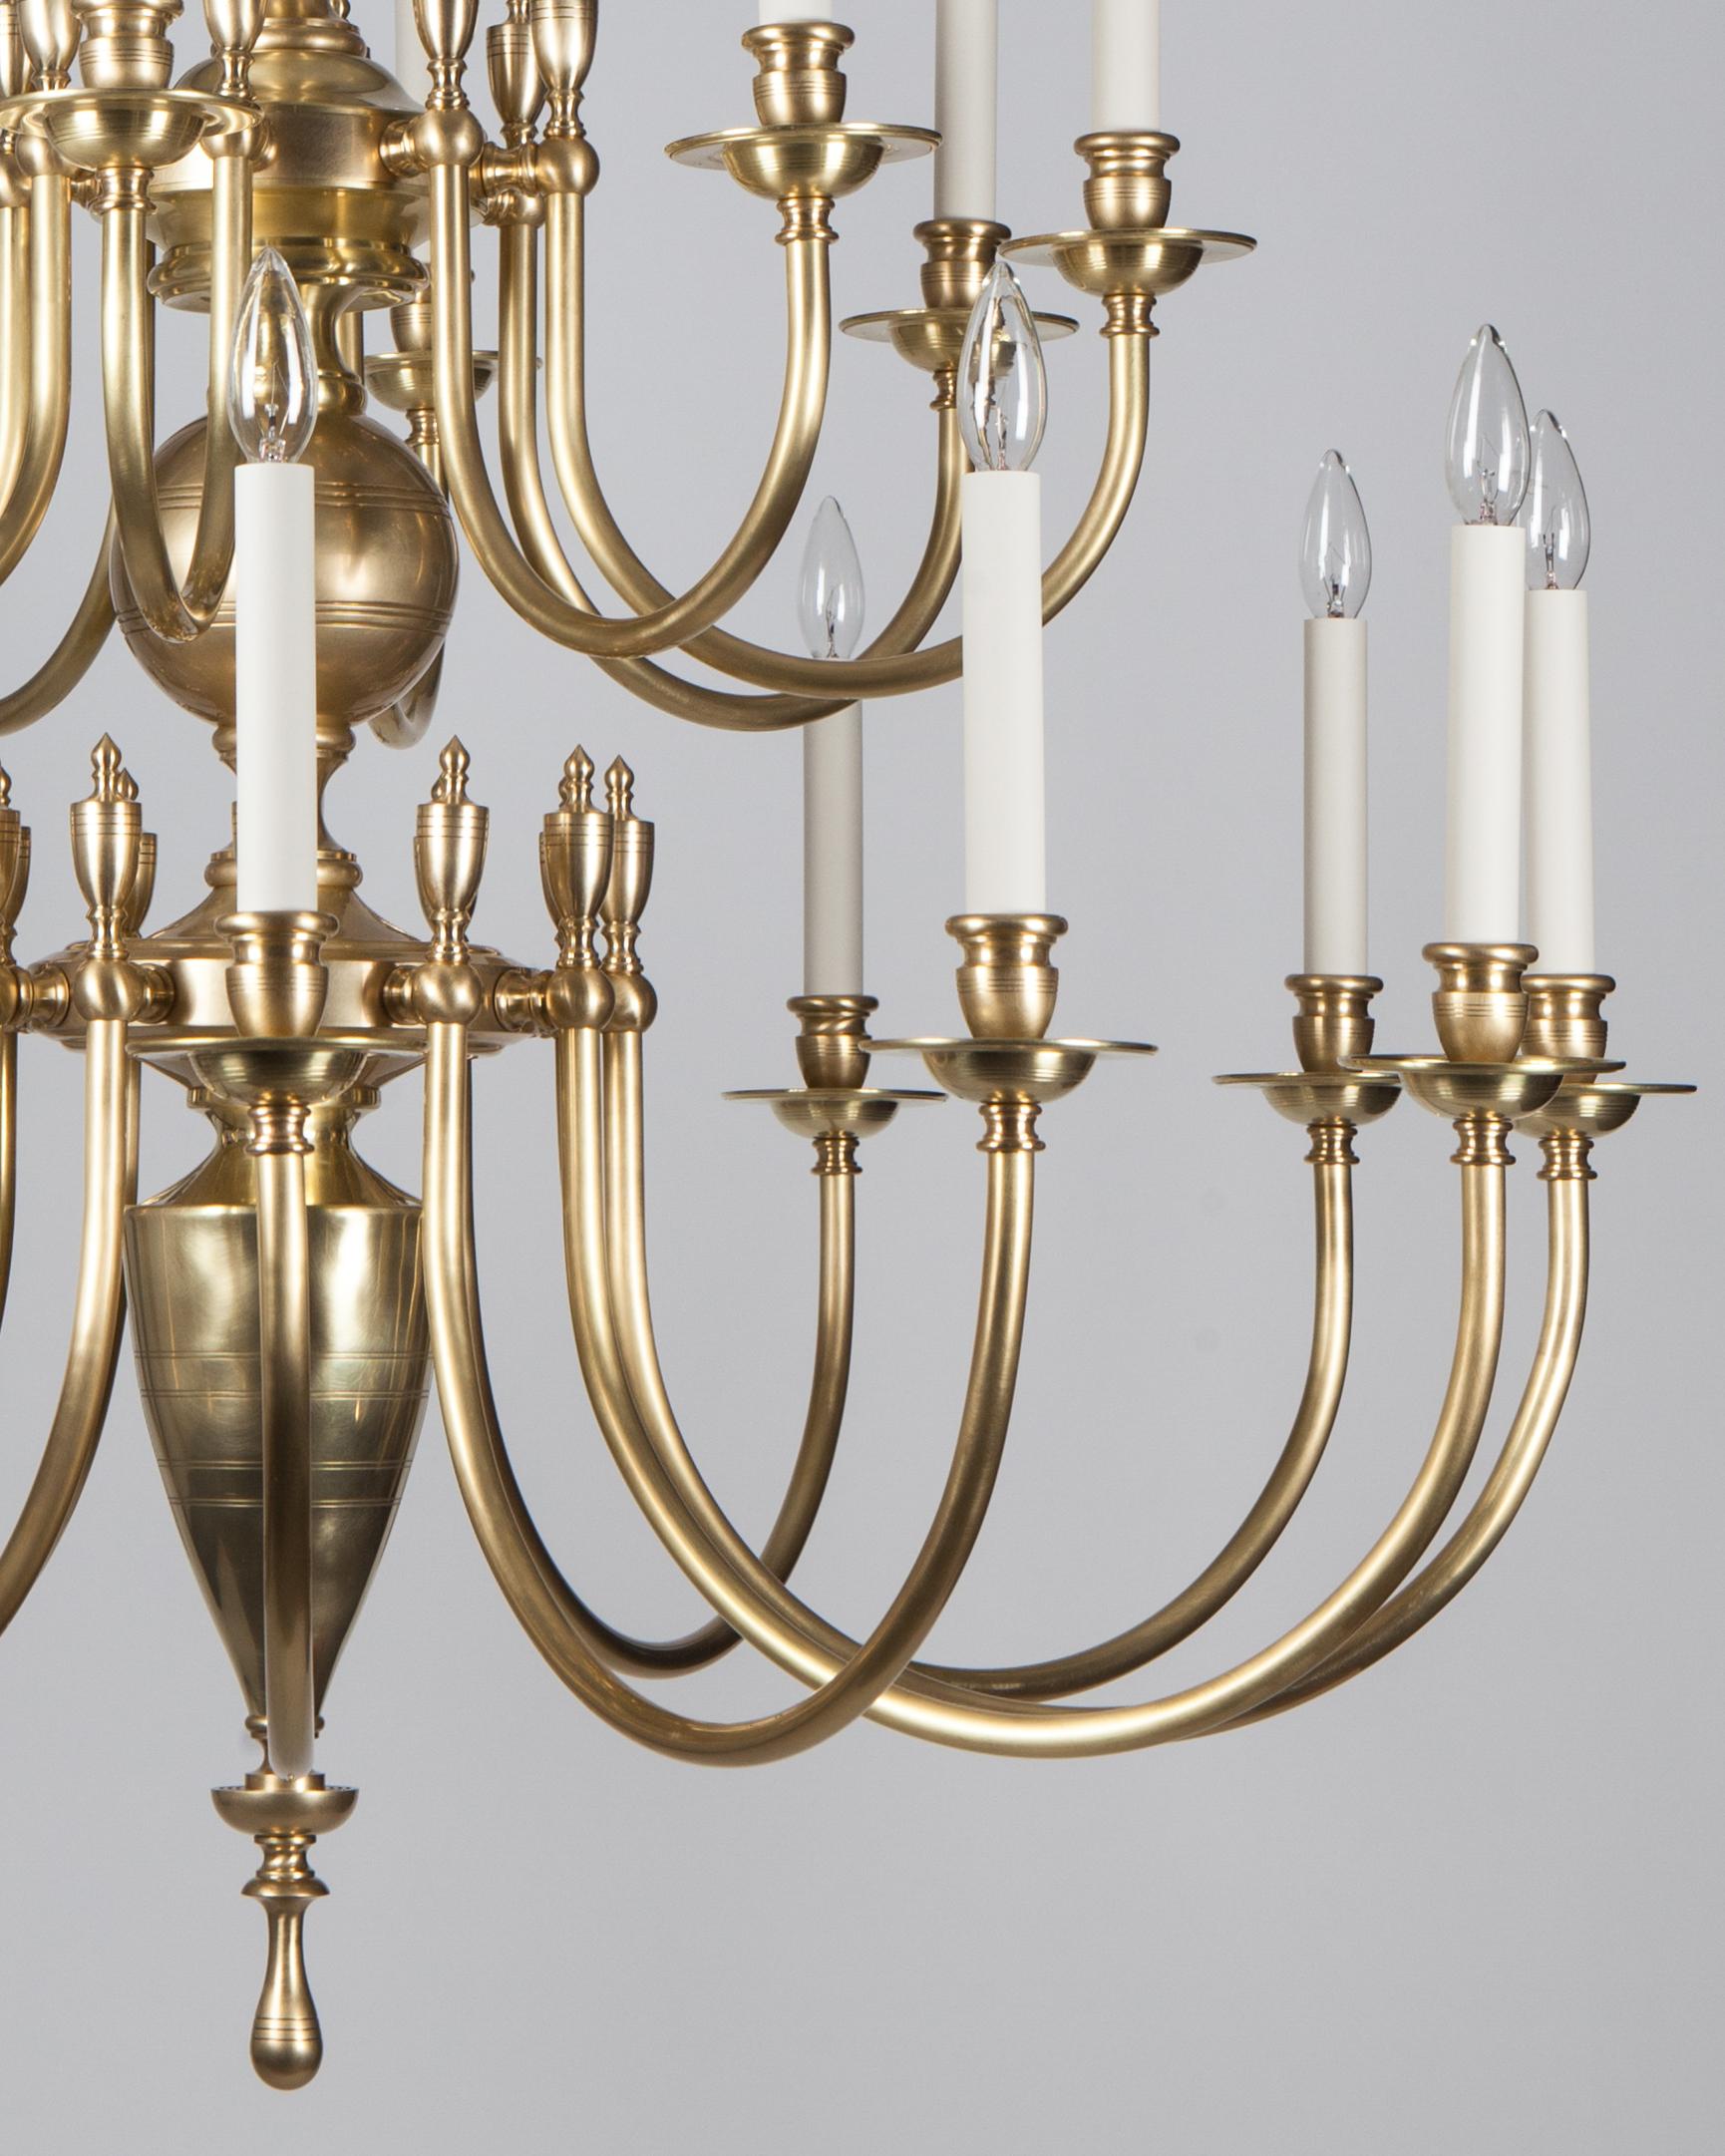 Dutch Colonial Three-Tier Solid Brass Astrid 24 Chandelier by Remains Lighting, Burnished Brass